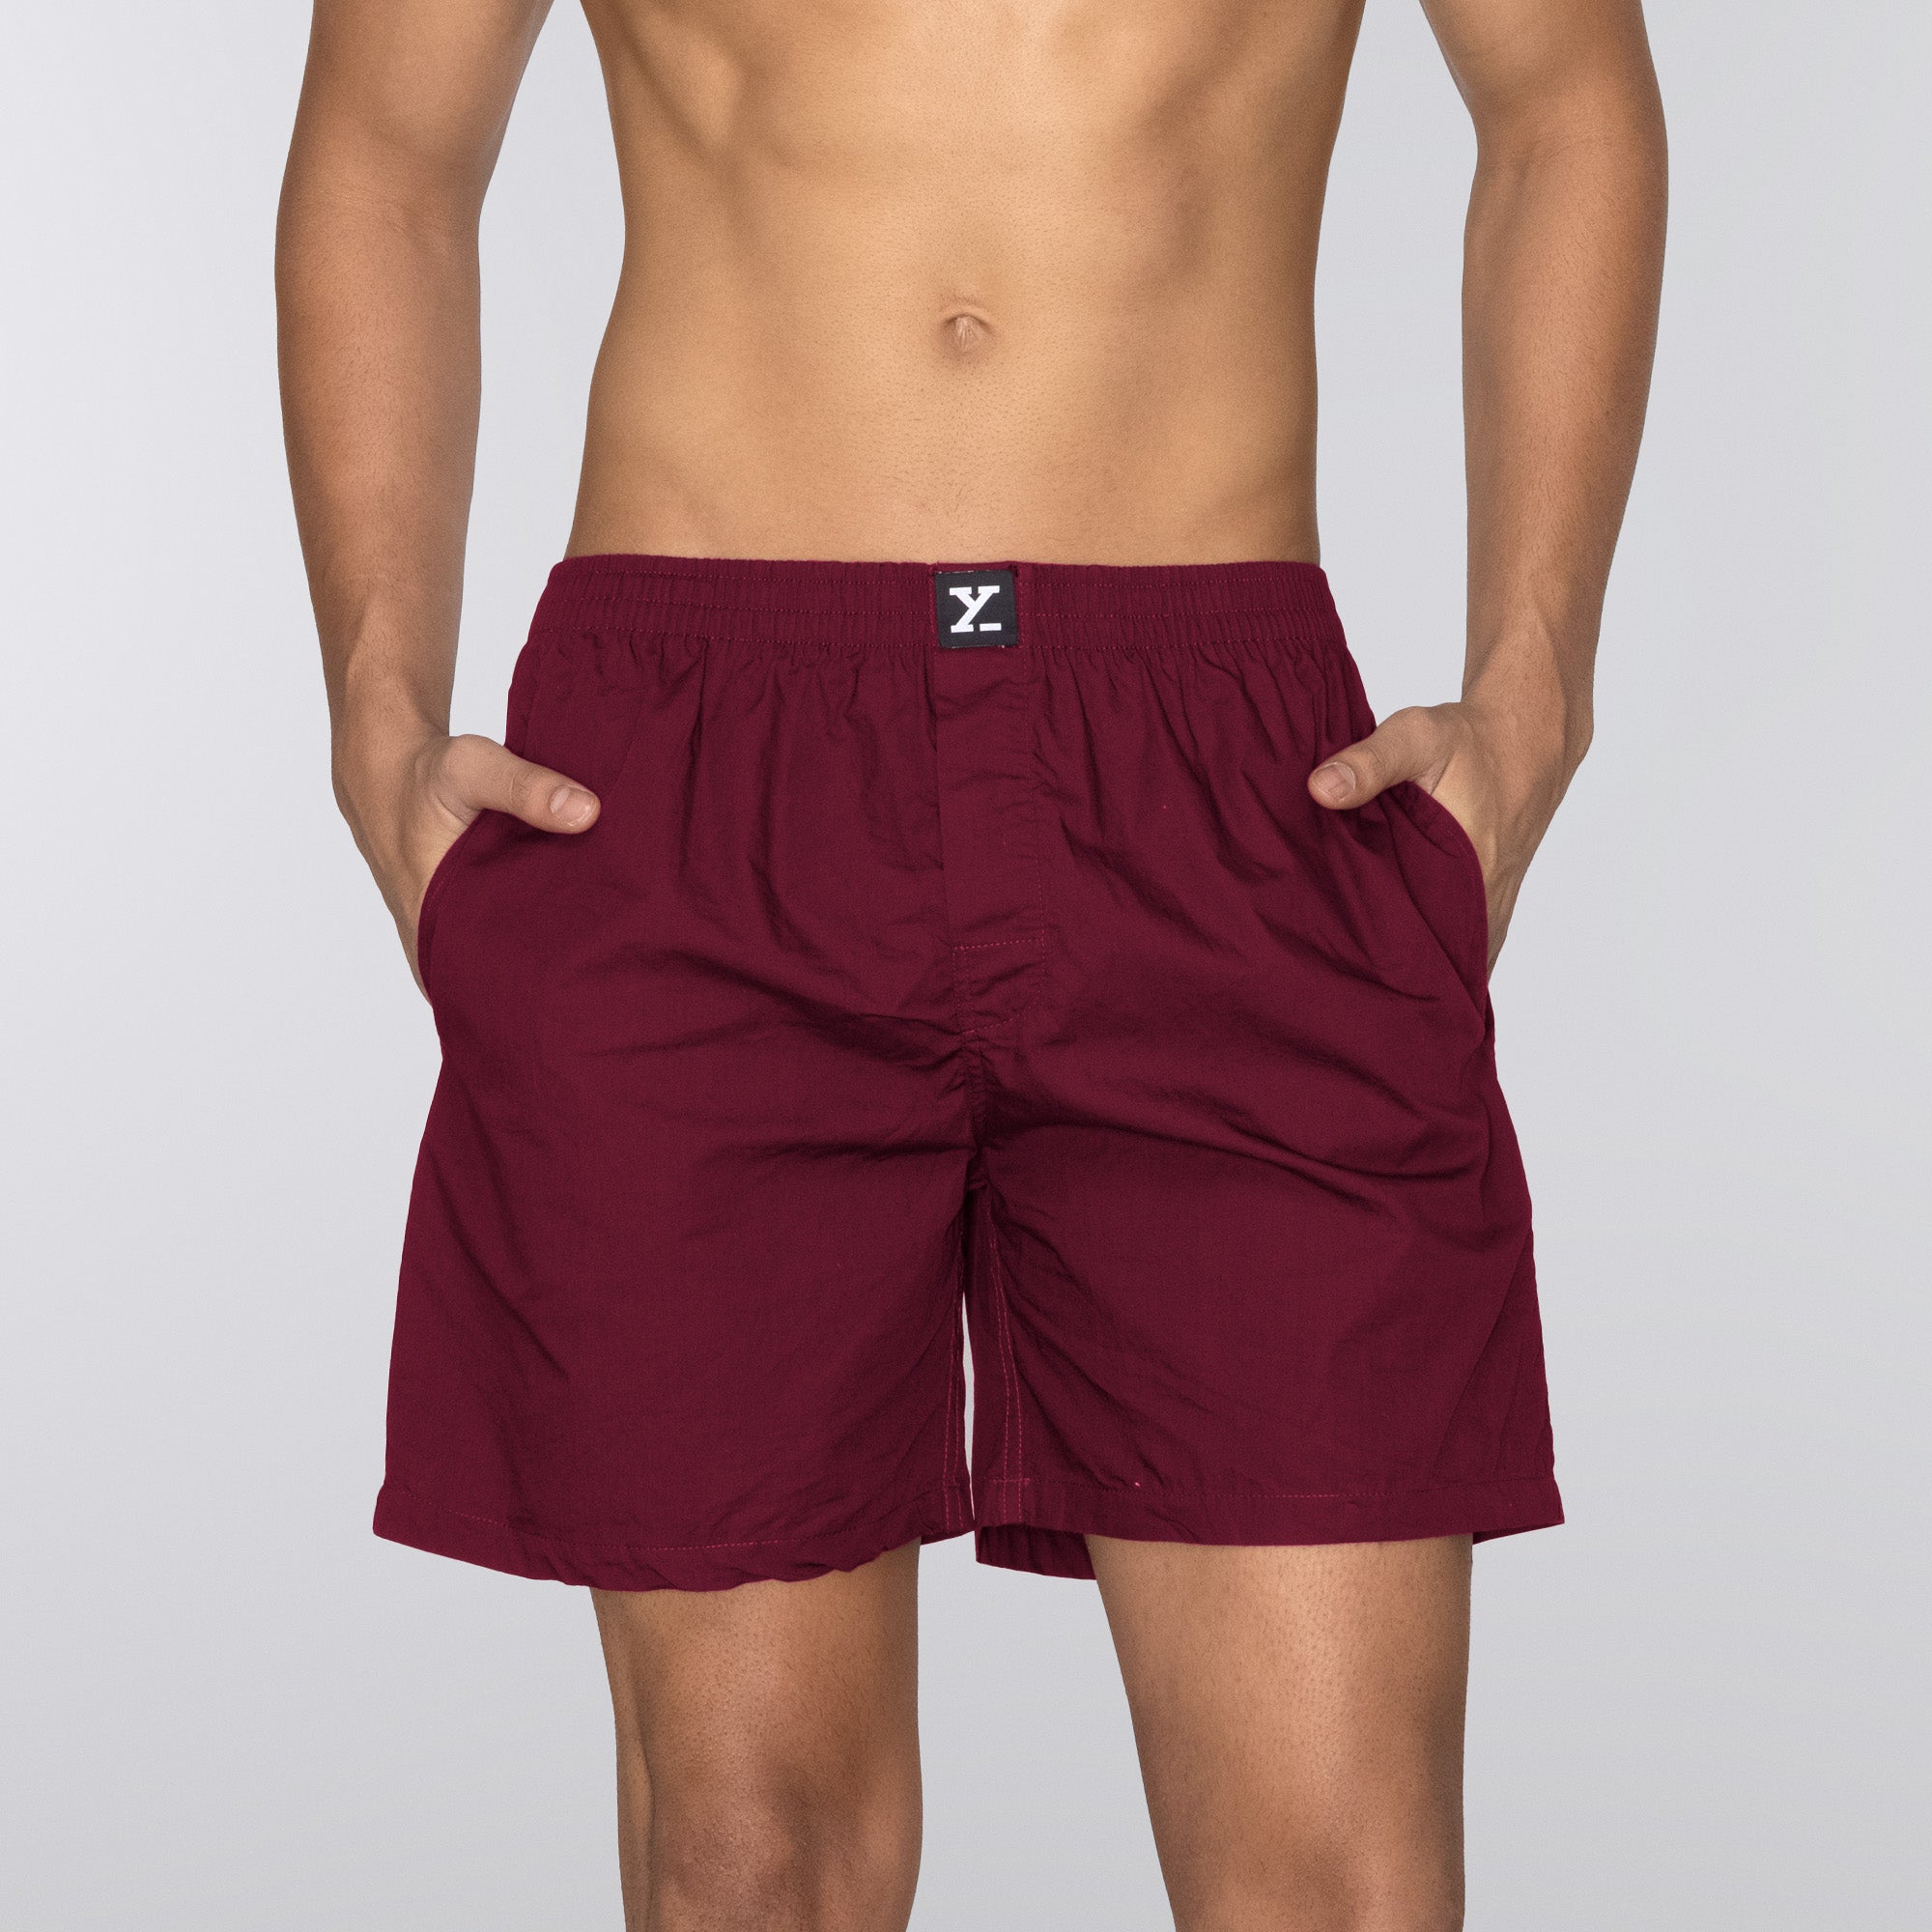 Cotton Boxer For Men - Red Boxers Shorts- XYXX – XYXX Apparels